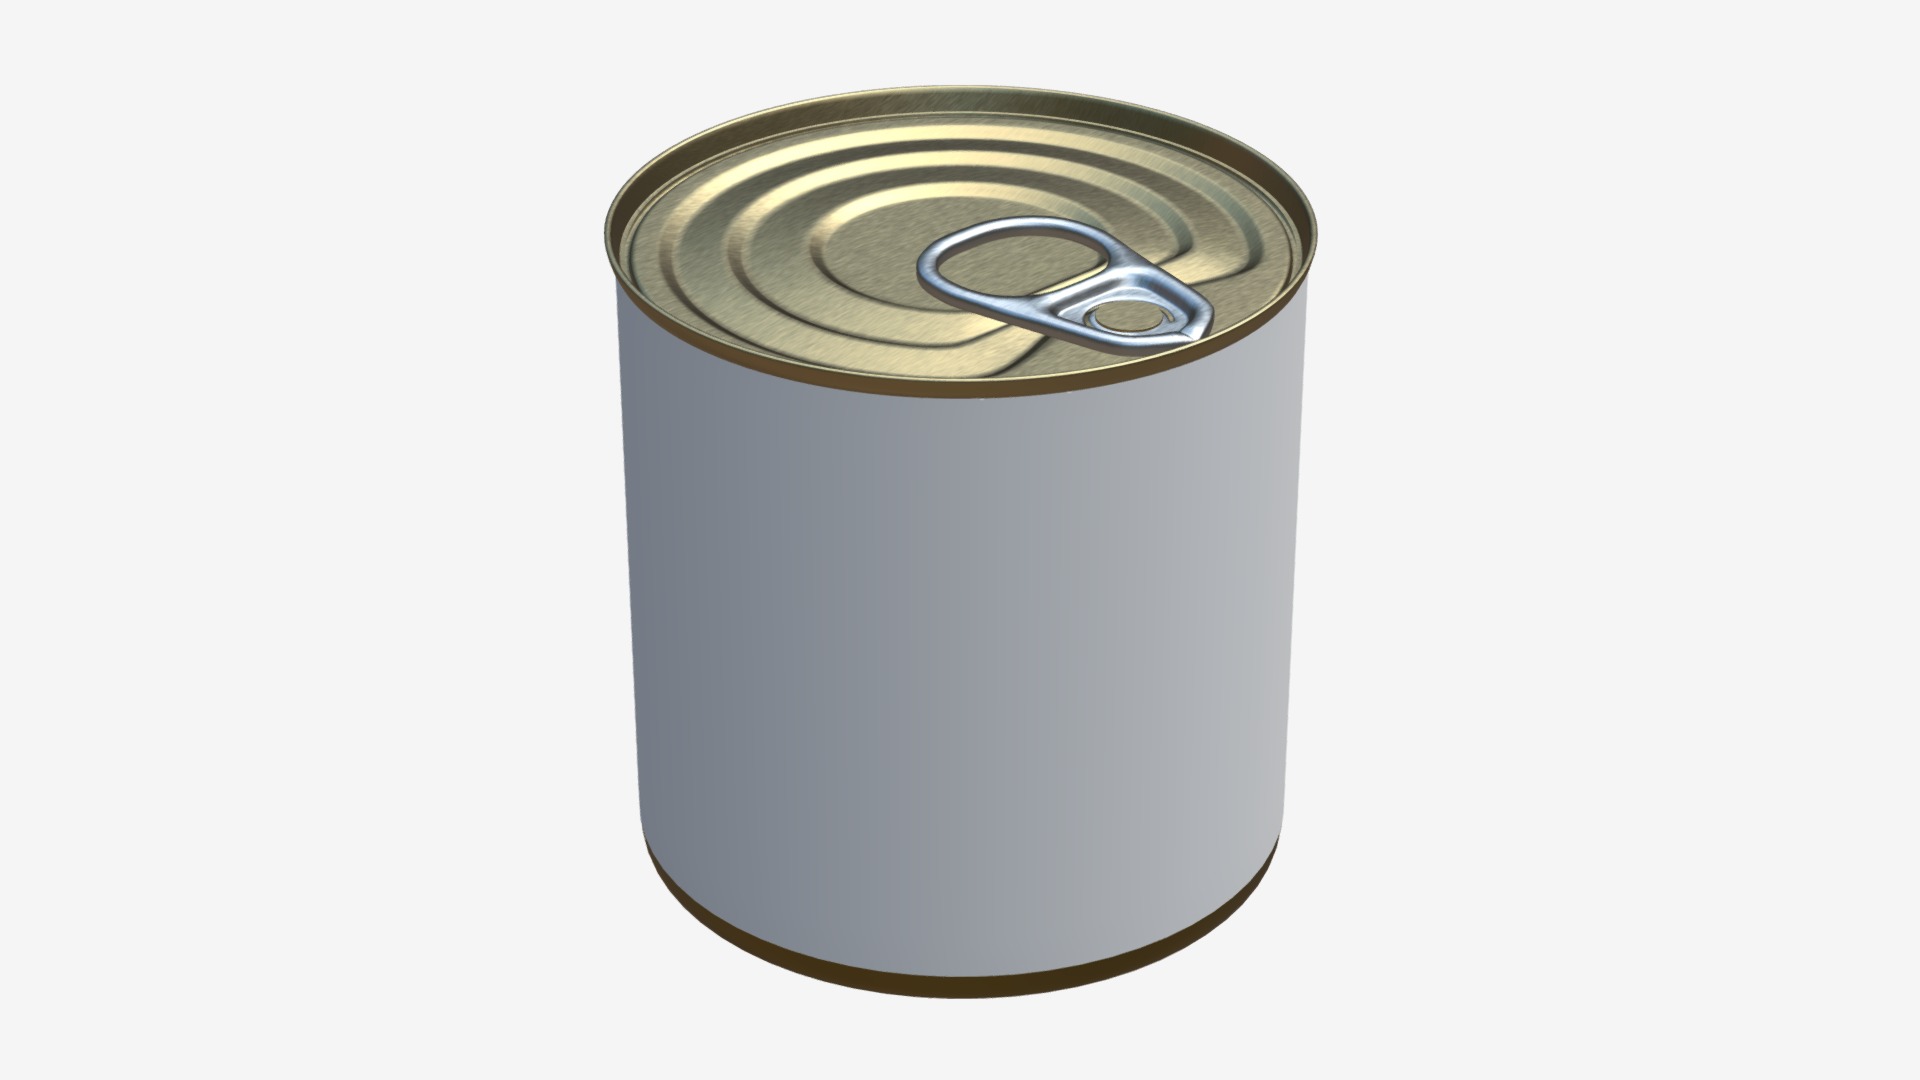 Created in 3ds max 2016
Saved to 3ds max 2013
Units: Centimeters
Dimension: 8.37 x 8.37 x 6.34
Polys: 15838
XForm: Yes
Box Trick: Yes
Model Parts: 4 - Food tin can 11 - Buy Royalty Free 3D model by HQ3DMOD (@AivisAstics) 3d model